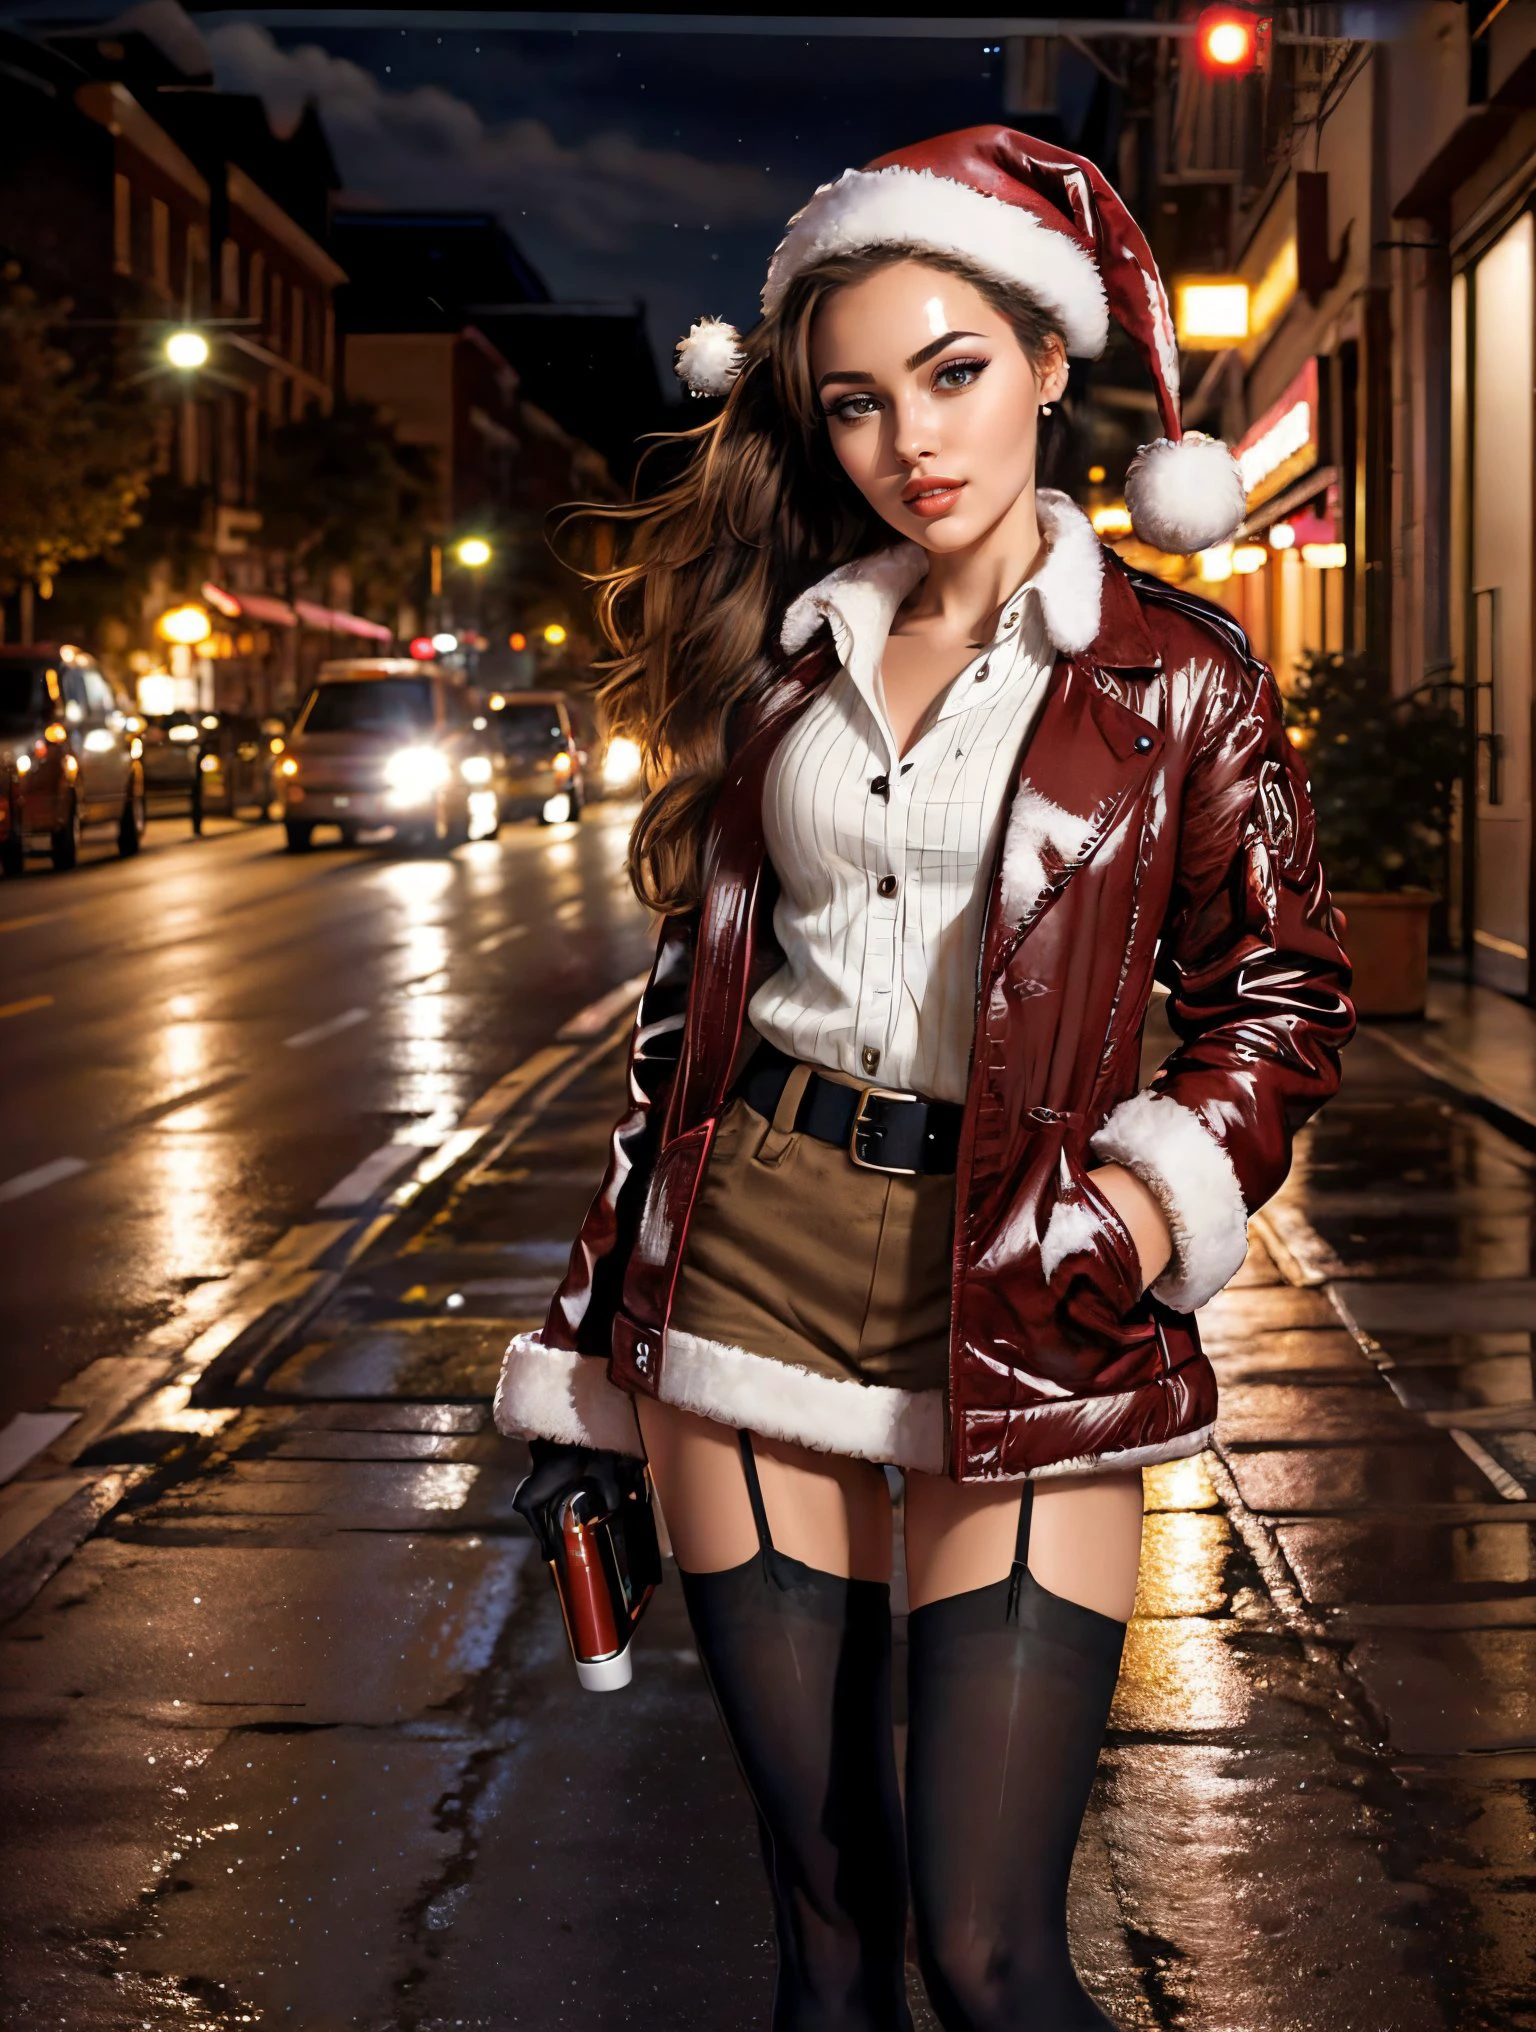 ((Masterpiece, realism, best quality)), ray tracing, vogue, smug, smirk, a sexy girl at school, new year, woman twin tails, red lips, slutty, jewelry, standing, full body, pantyhose, shoes, striped, belt, bracelet, fashion,
night, sexy atmosphere, christmas tree, by lee jeffries, nikon d850 film, stock photograph, kodak portra 400, camera f1.6, lens, rich colors, hyper realistic, lifelike, texture dramatic lighting, unrealengine, trending on artstation cinestill 800  
HIGHLY detailed, best quality, silhouette, spotlight, dark theme, S127_MartaMayer Santa hat, Santa lingerie red, bells, jacket, gloves 